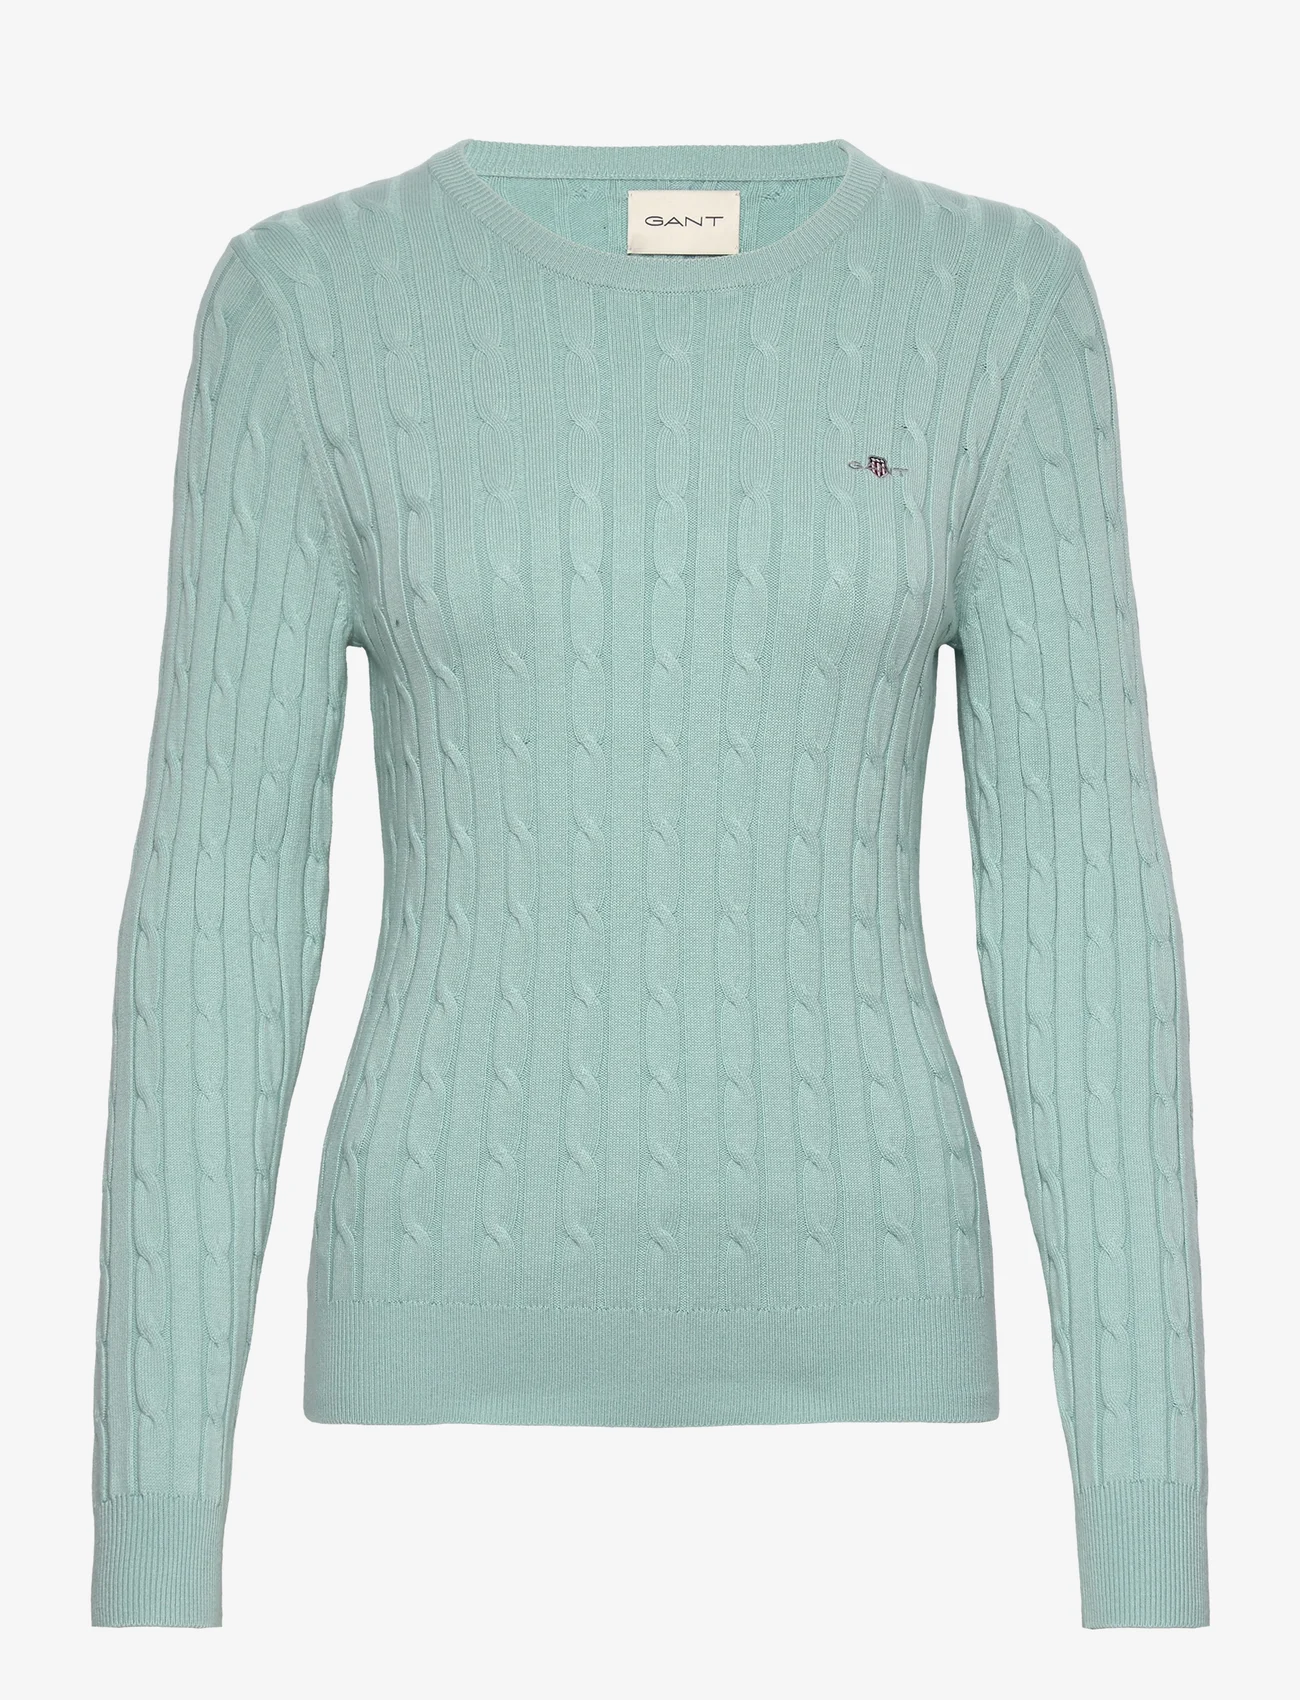 GANT - STRETCH COTTON CABLE C-NECK - pullover - dusty turquoise - 0